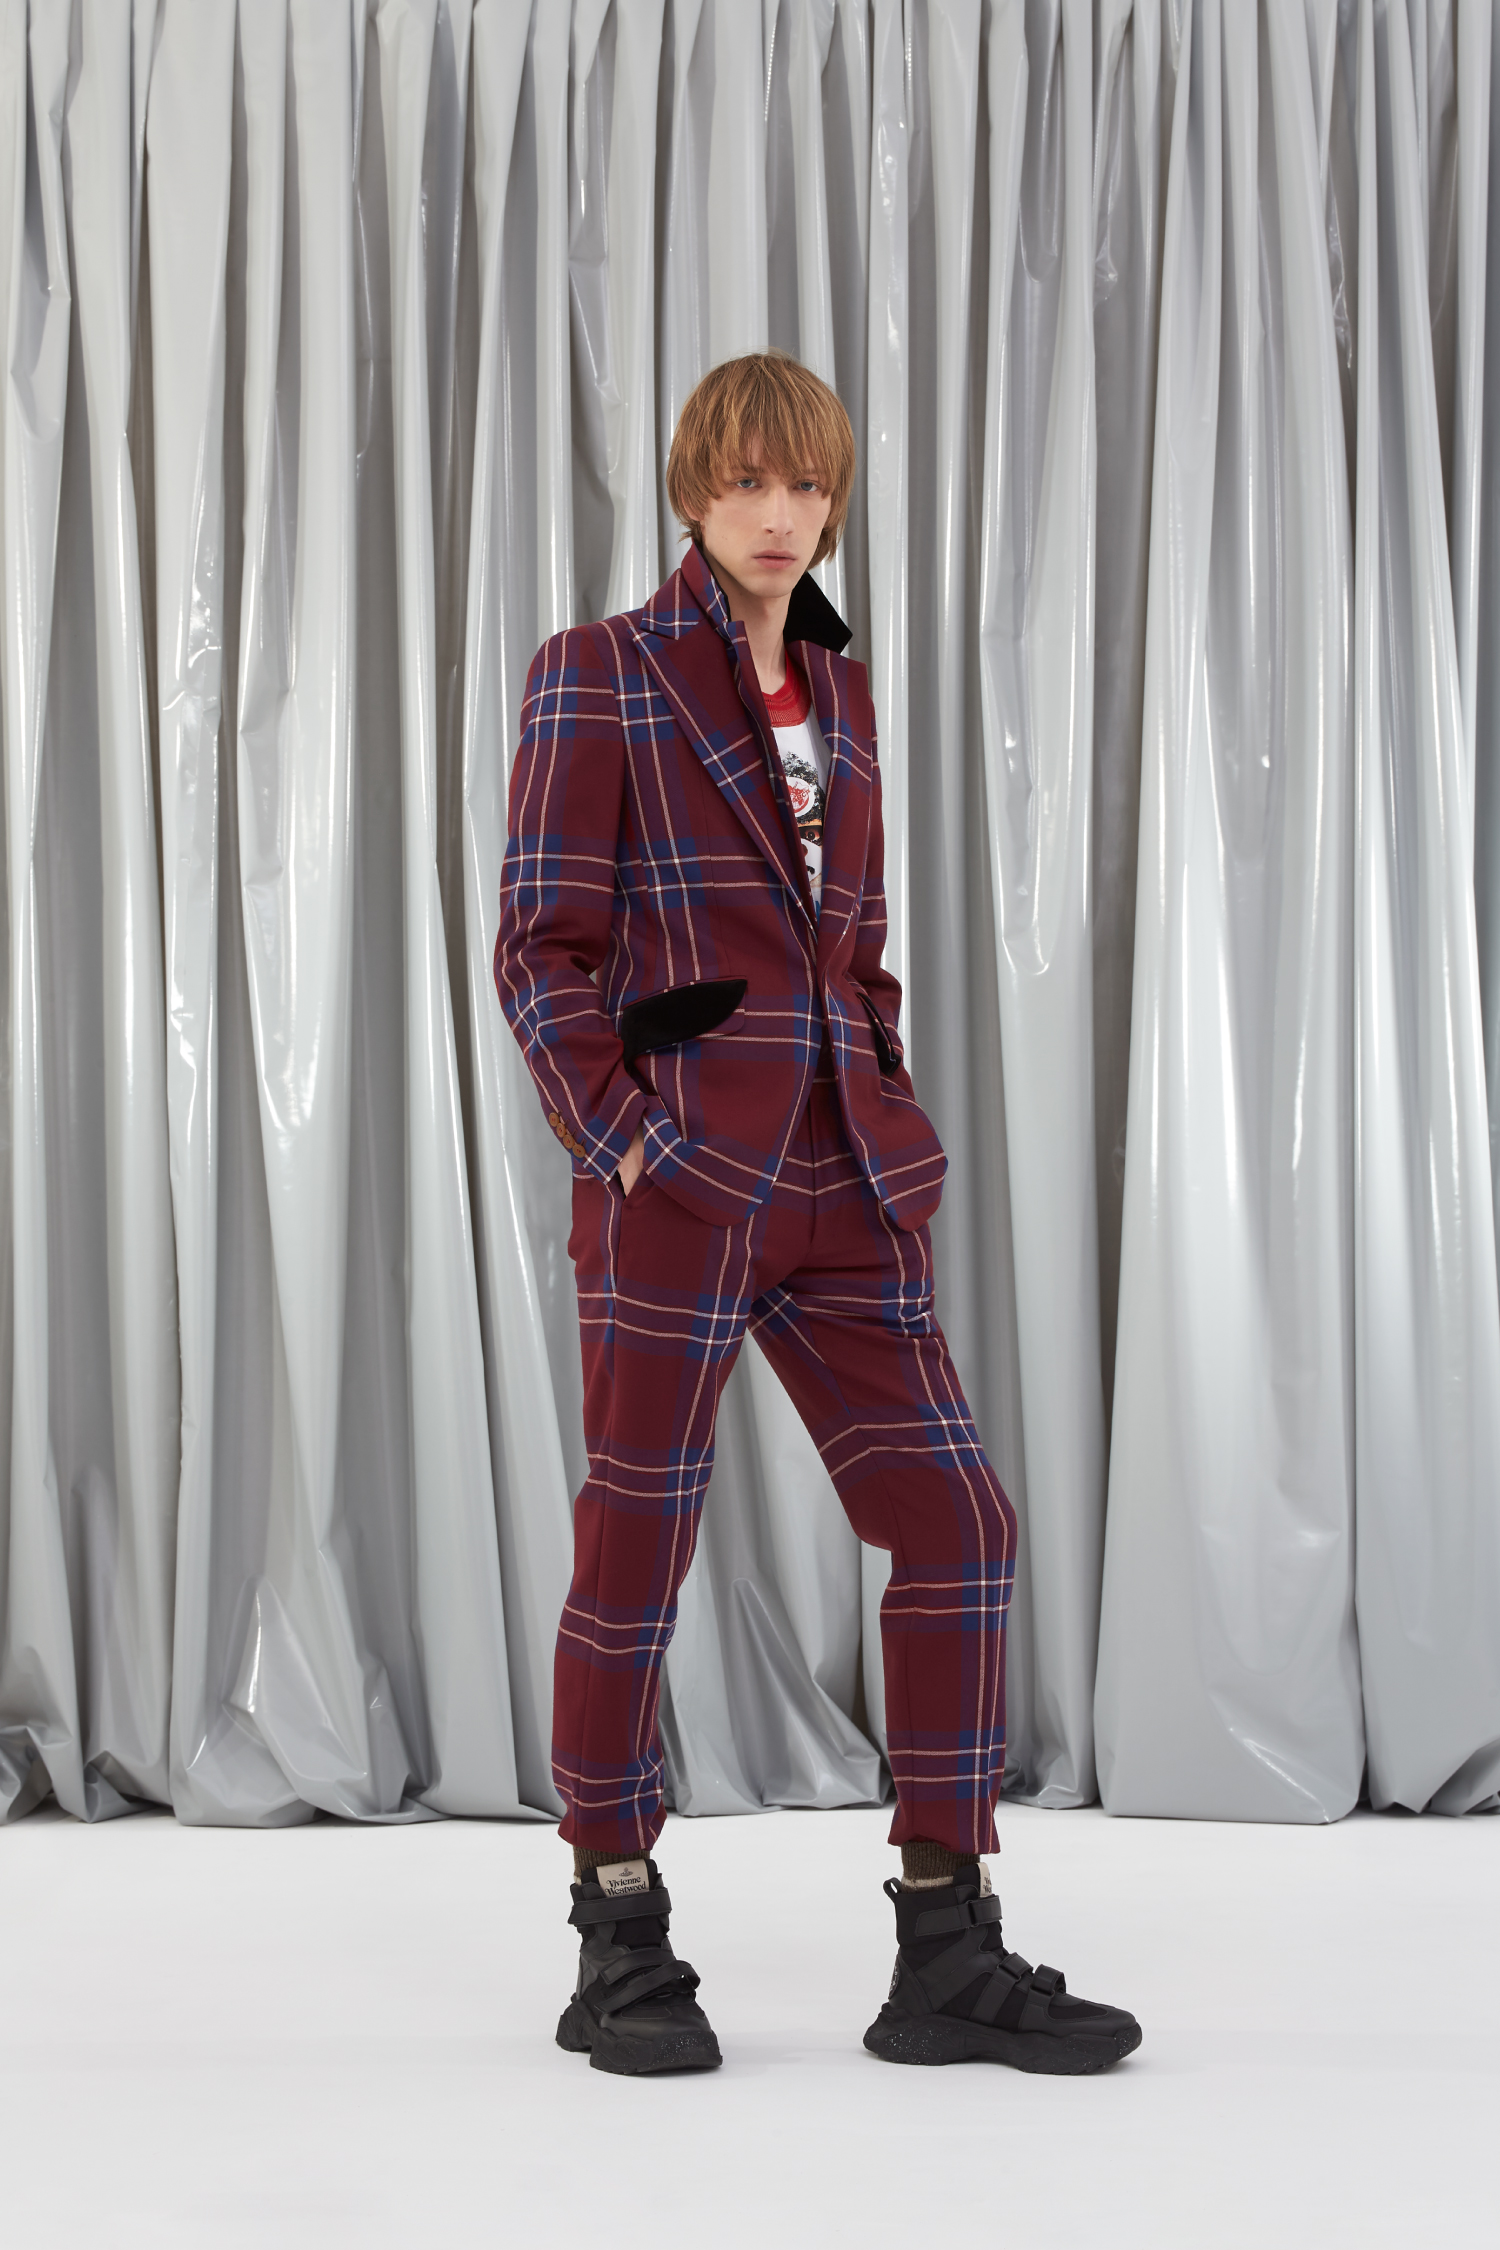 Vivienne Westwood MAN AW21 Collection” 7.17(Sat) New Arrival ...